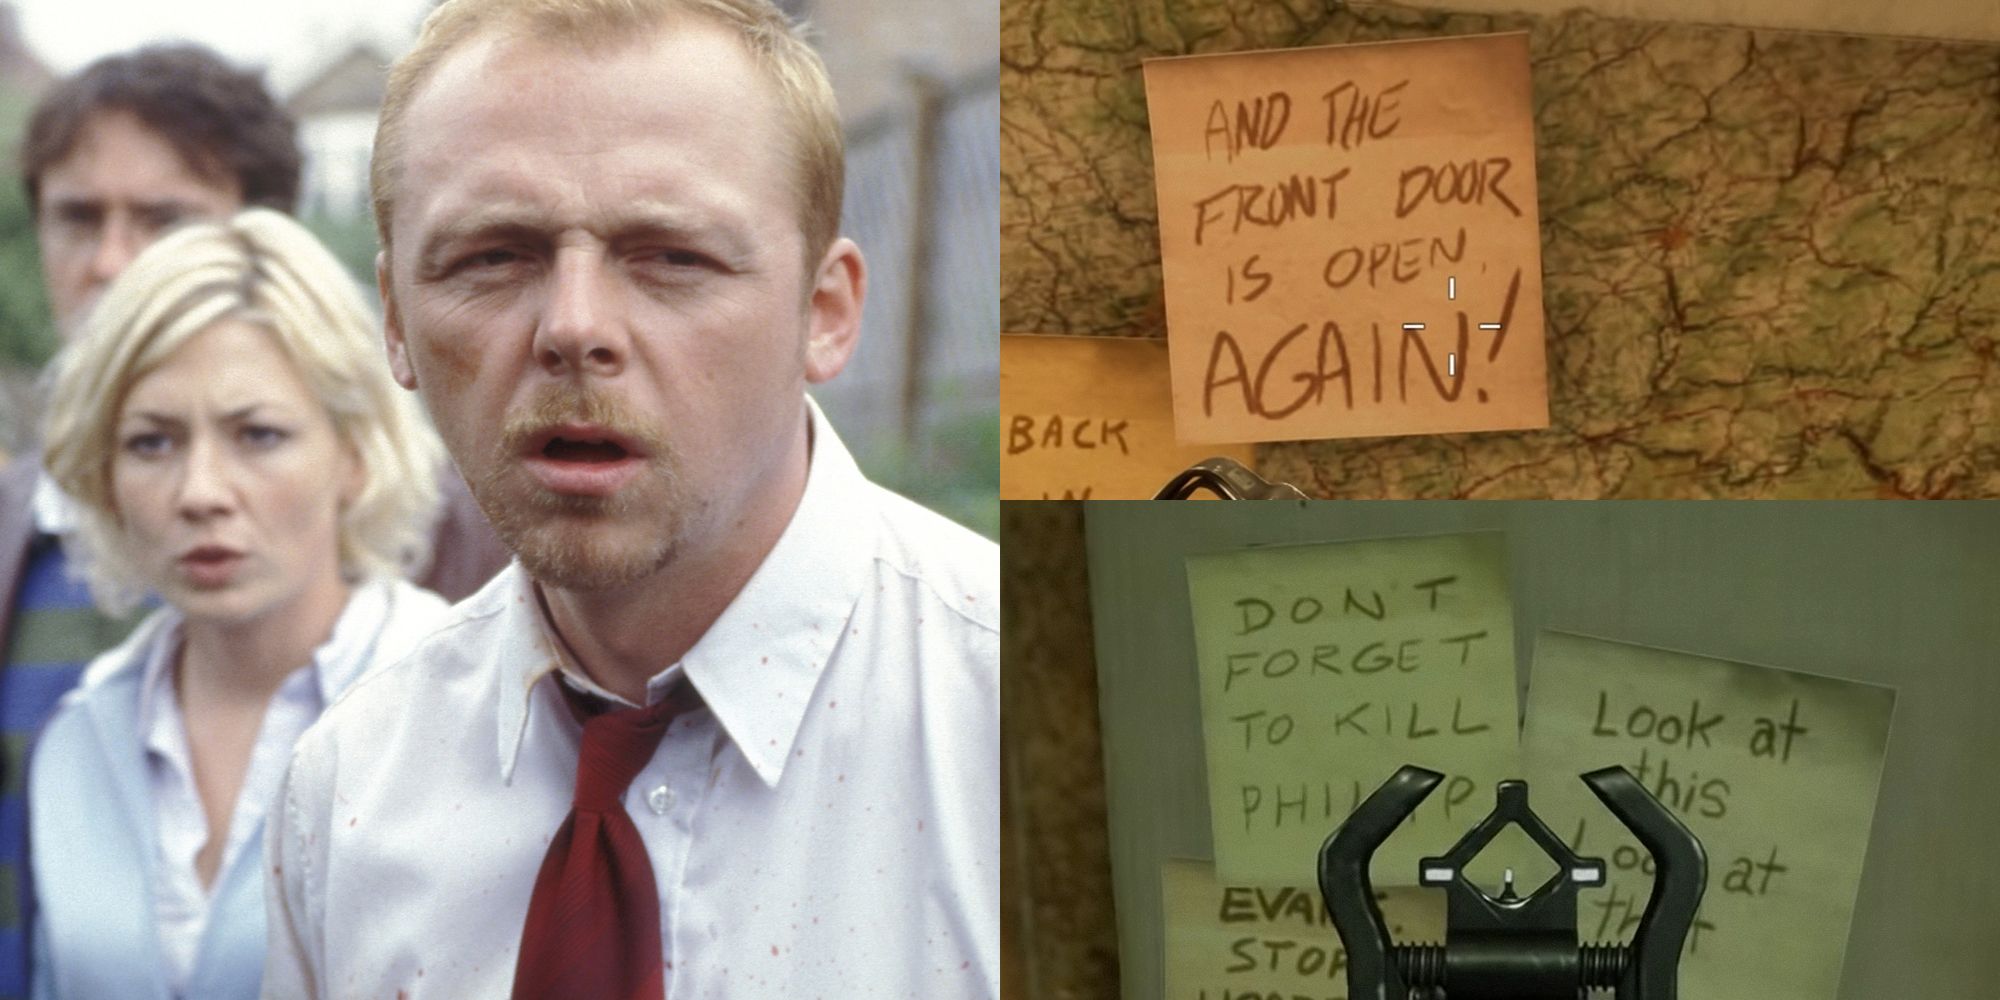 Split image with three photos. The first is a screenshot from the film Shaun of the Dead. The second is a post-it note in Back 4 Blood that reads "And the front door is open again!" The third is a post-it note in Back 4 Blood that reads "Don't forget to kill Philip."